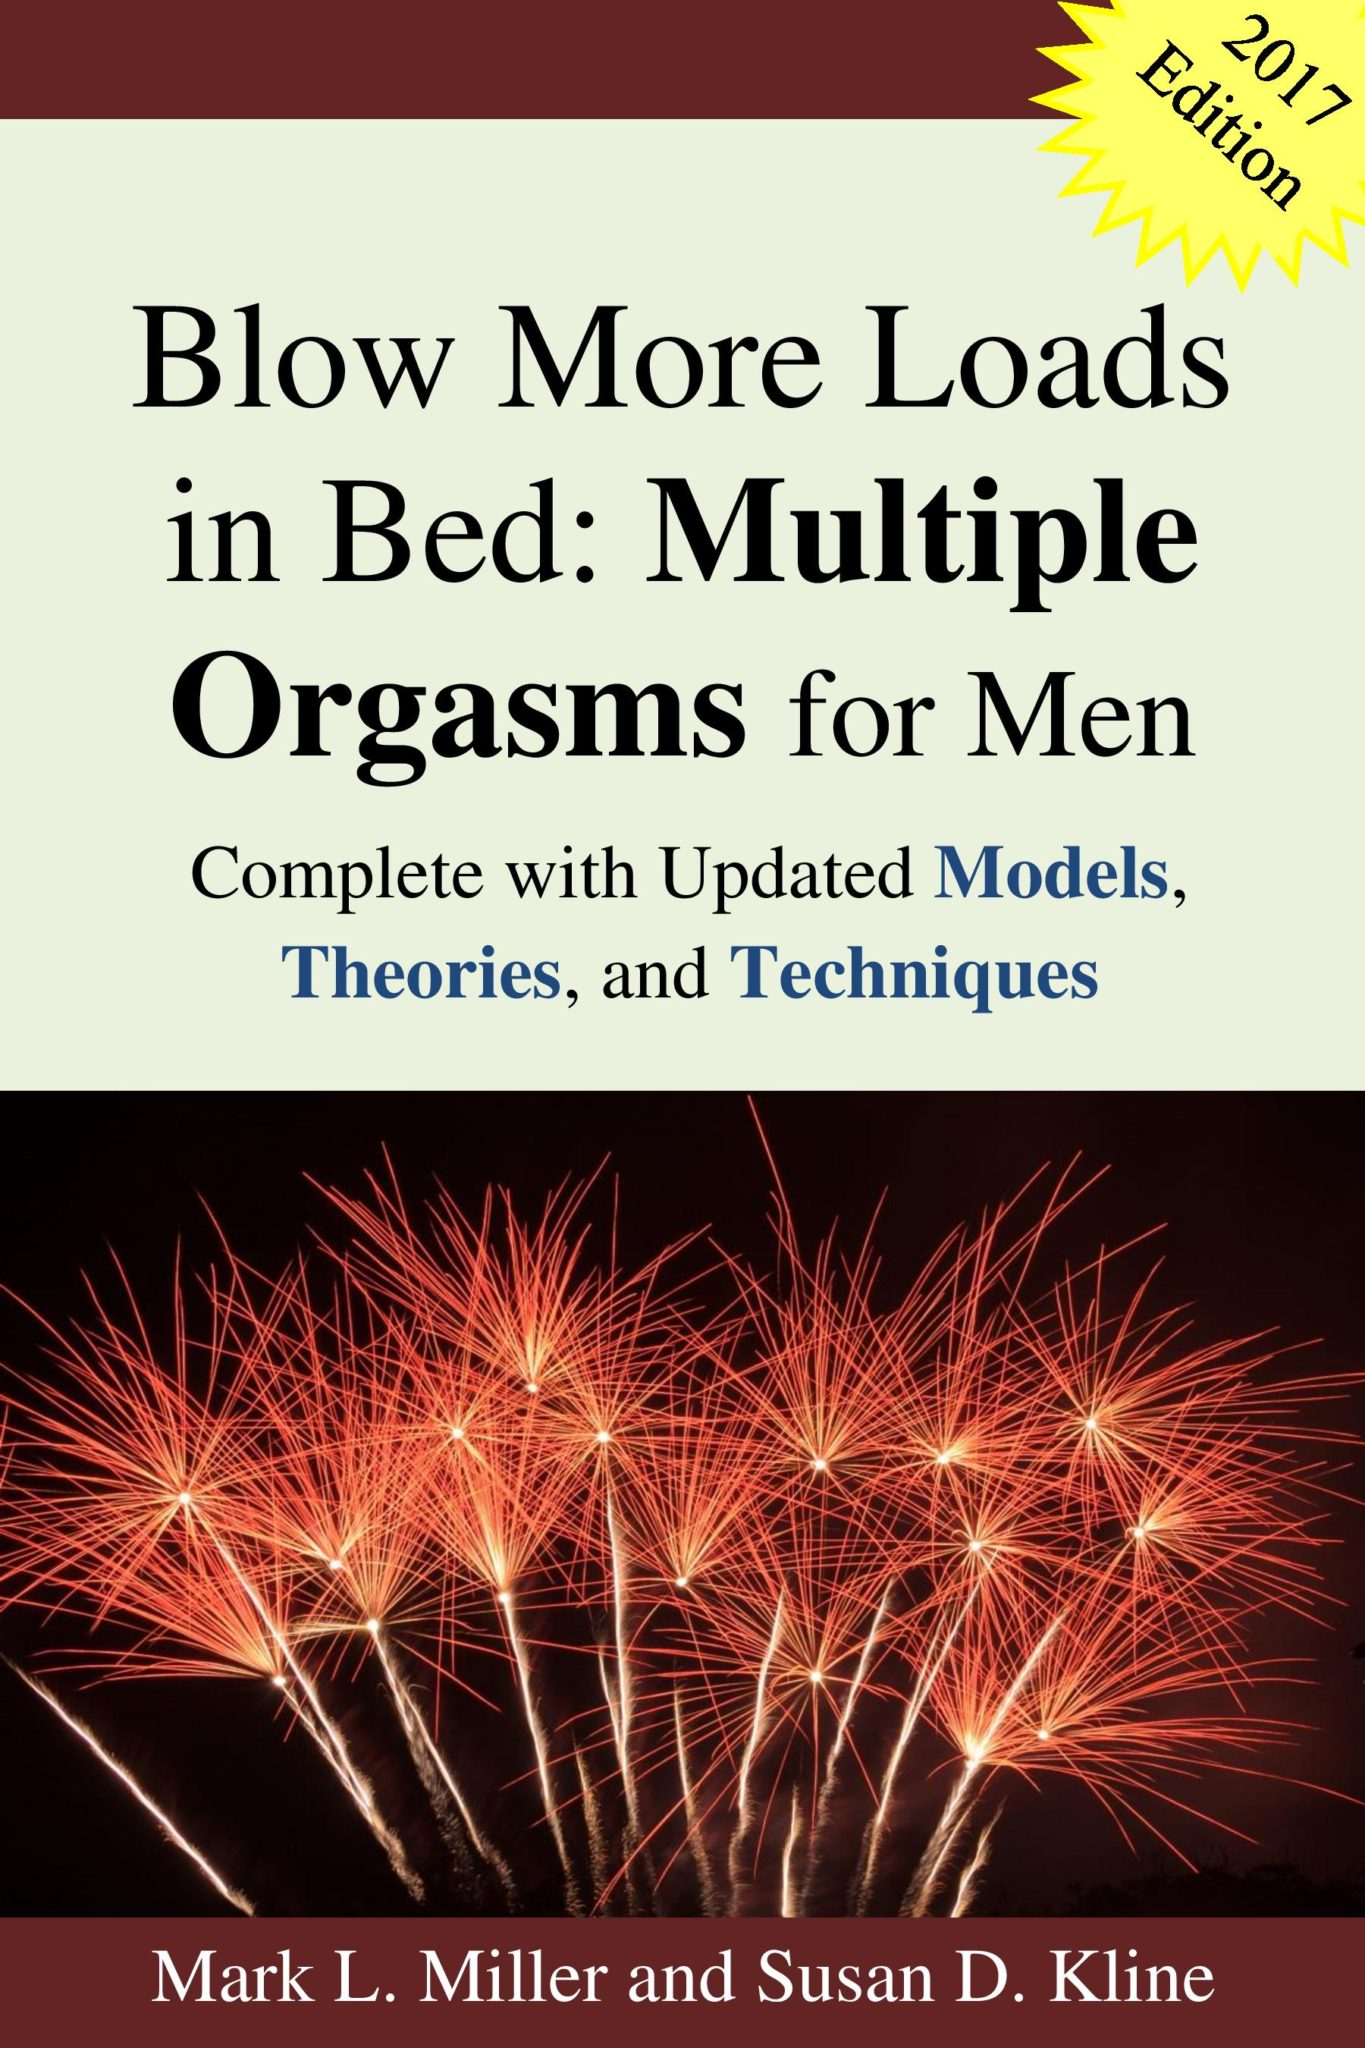 FREE: Blow More Loads in Bed: Multiple Orgasms for Men by Mark Miller and Susan Kline